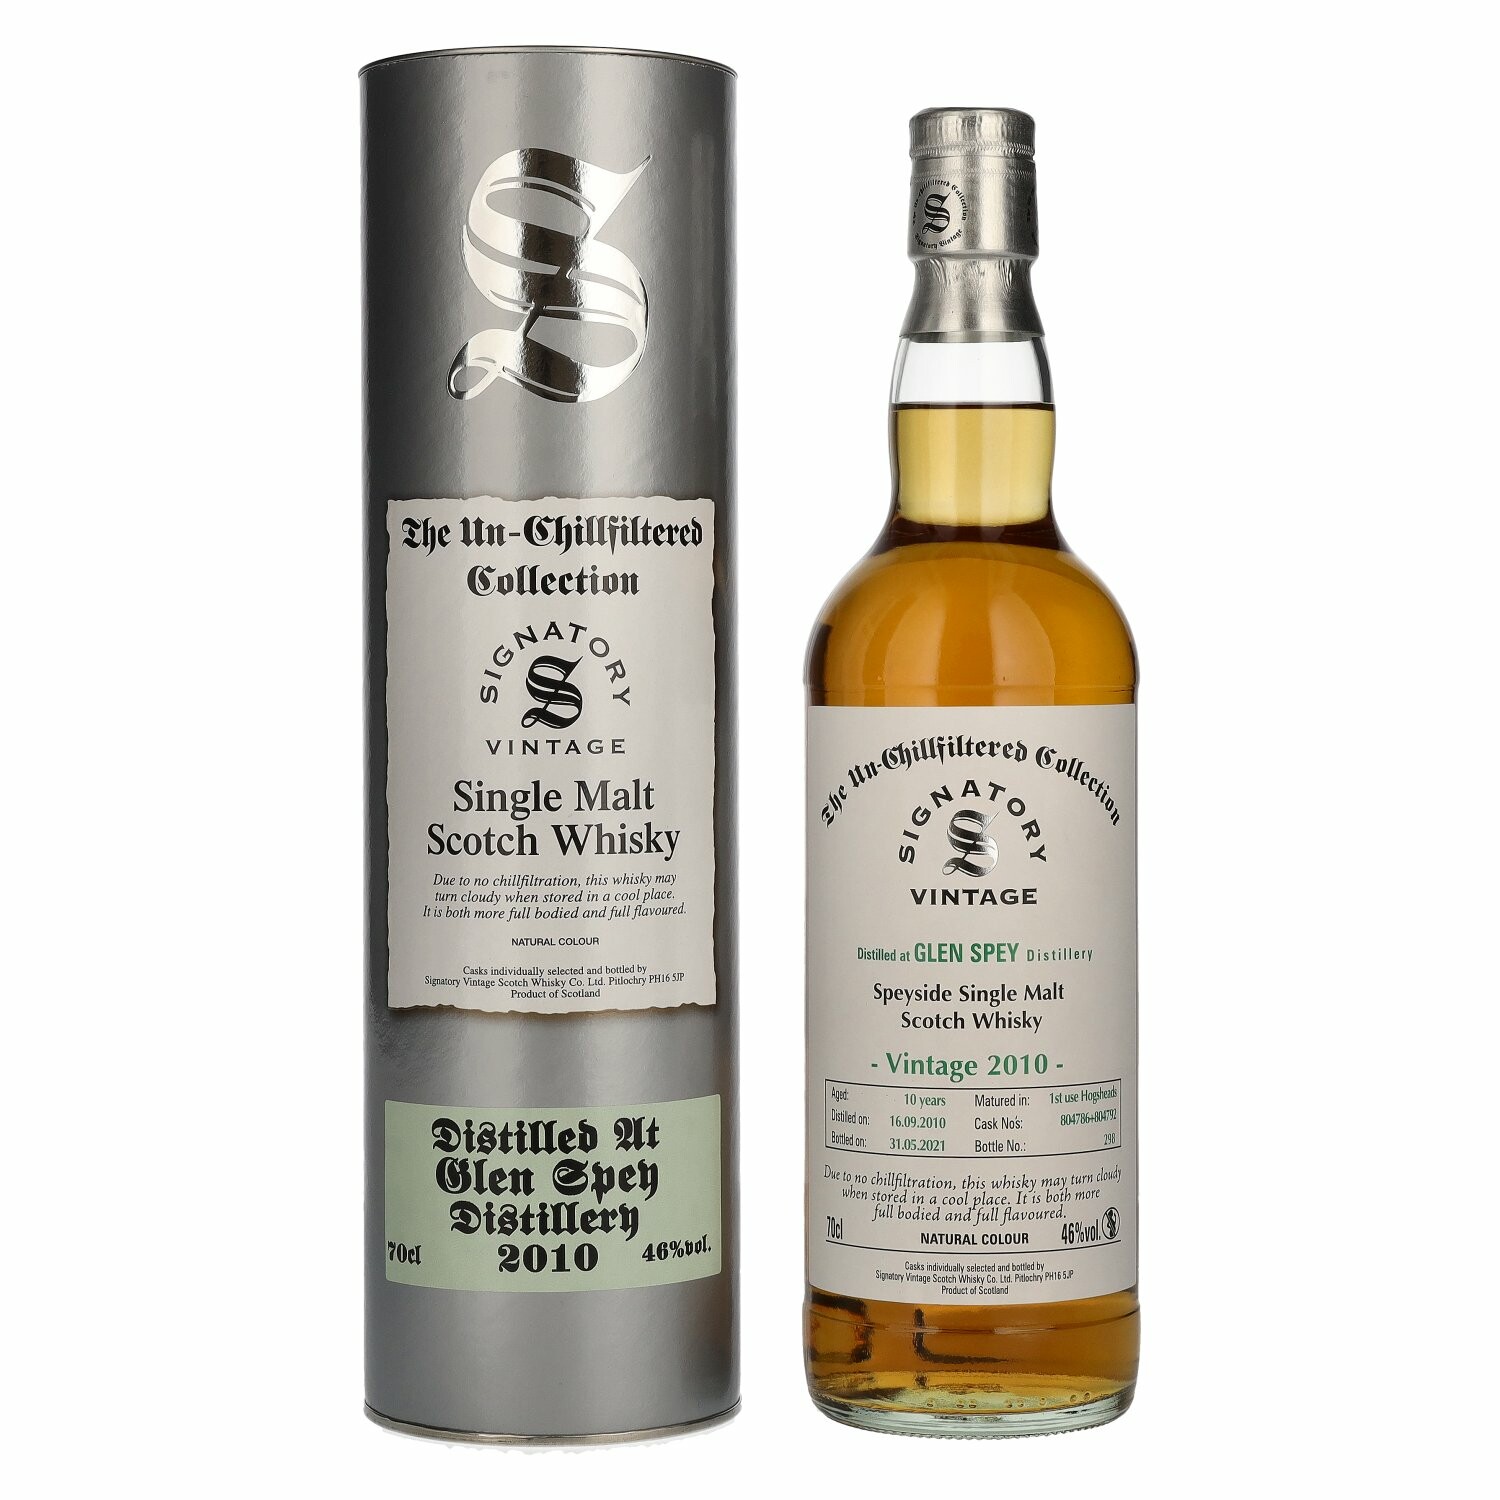 Signatory Vintage GLEN SPEY 10 Years Old The Un-Chillfiltered 2010 46% Vol. 0,7l in Giftbox